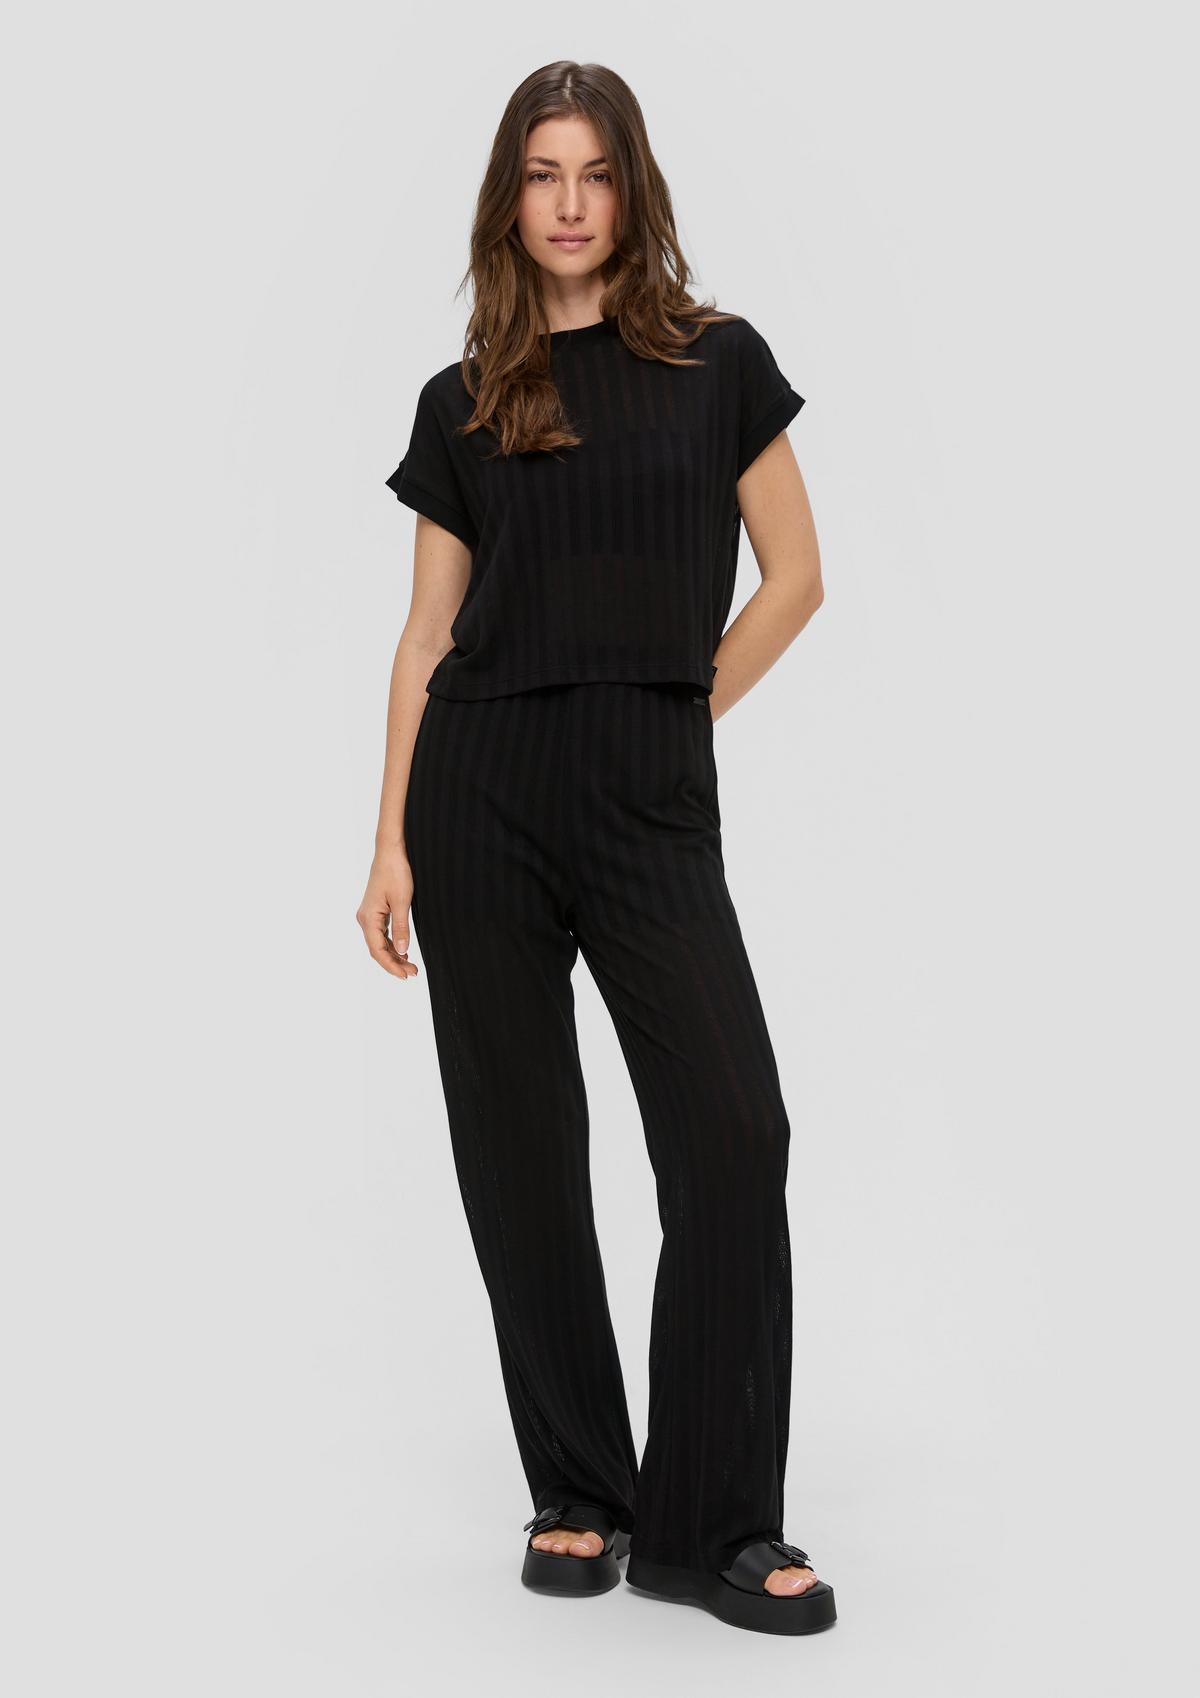 Regular fit: semi-sheer trousers with a textured pattern